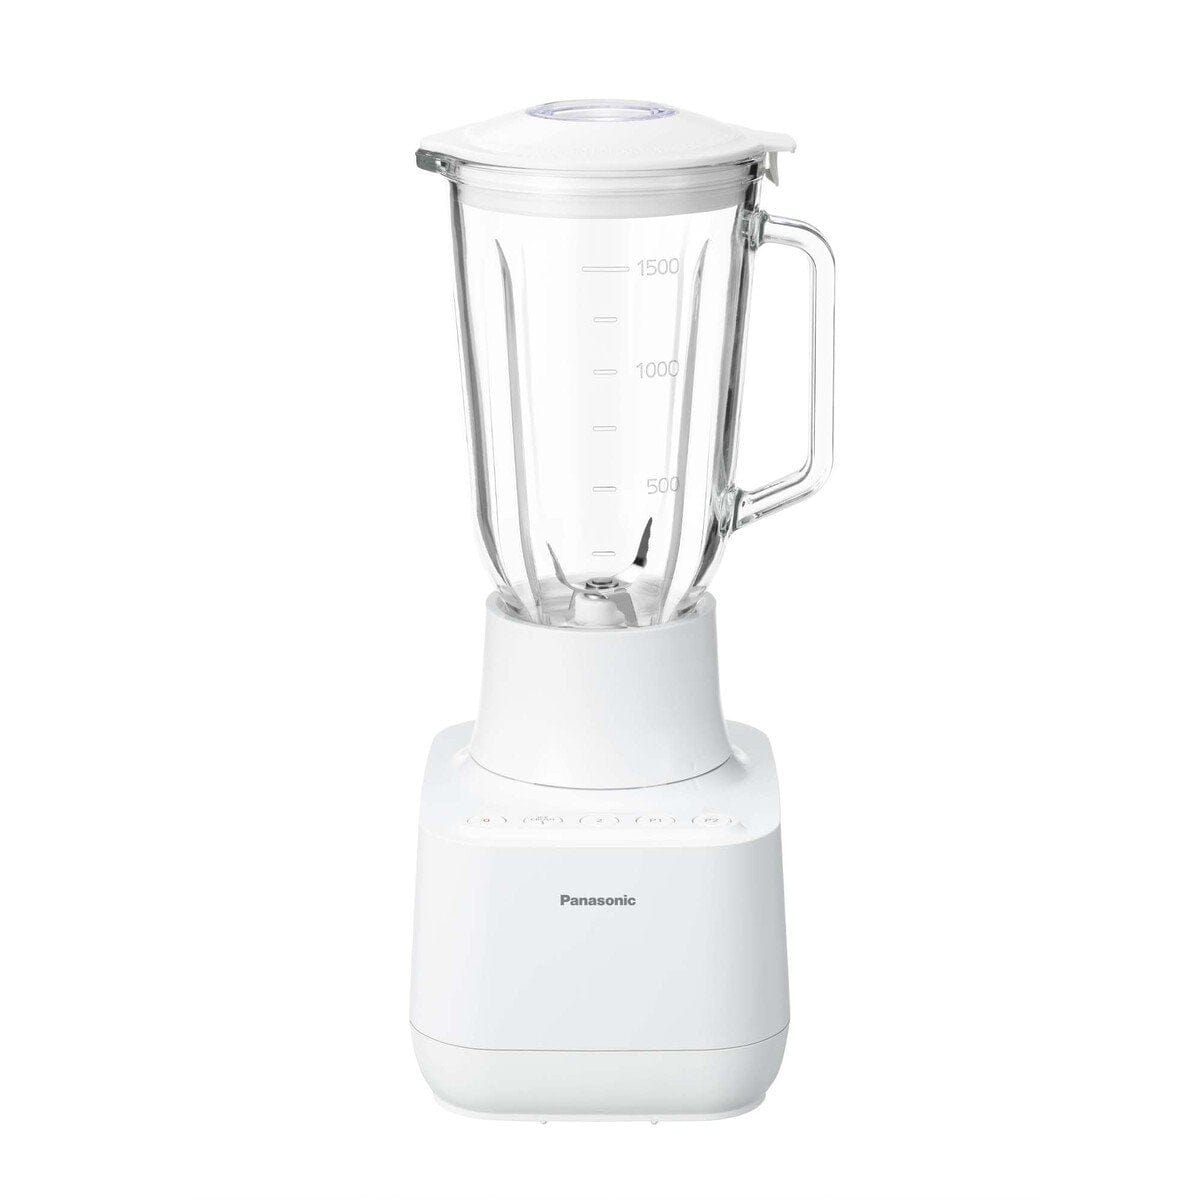 Panasonic 2L Stand Blender 700W - MX-MG5321 | supply Master Accra, Ghana Kitchen Appliances Buy Tools hardware Building materials